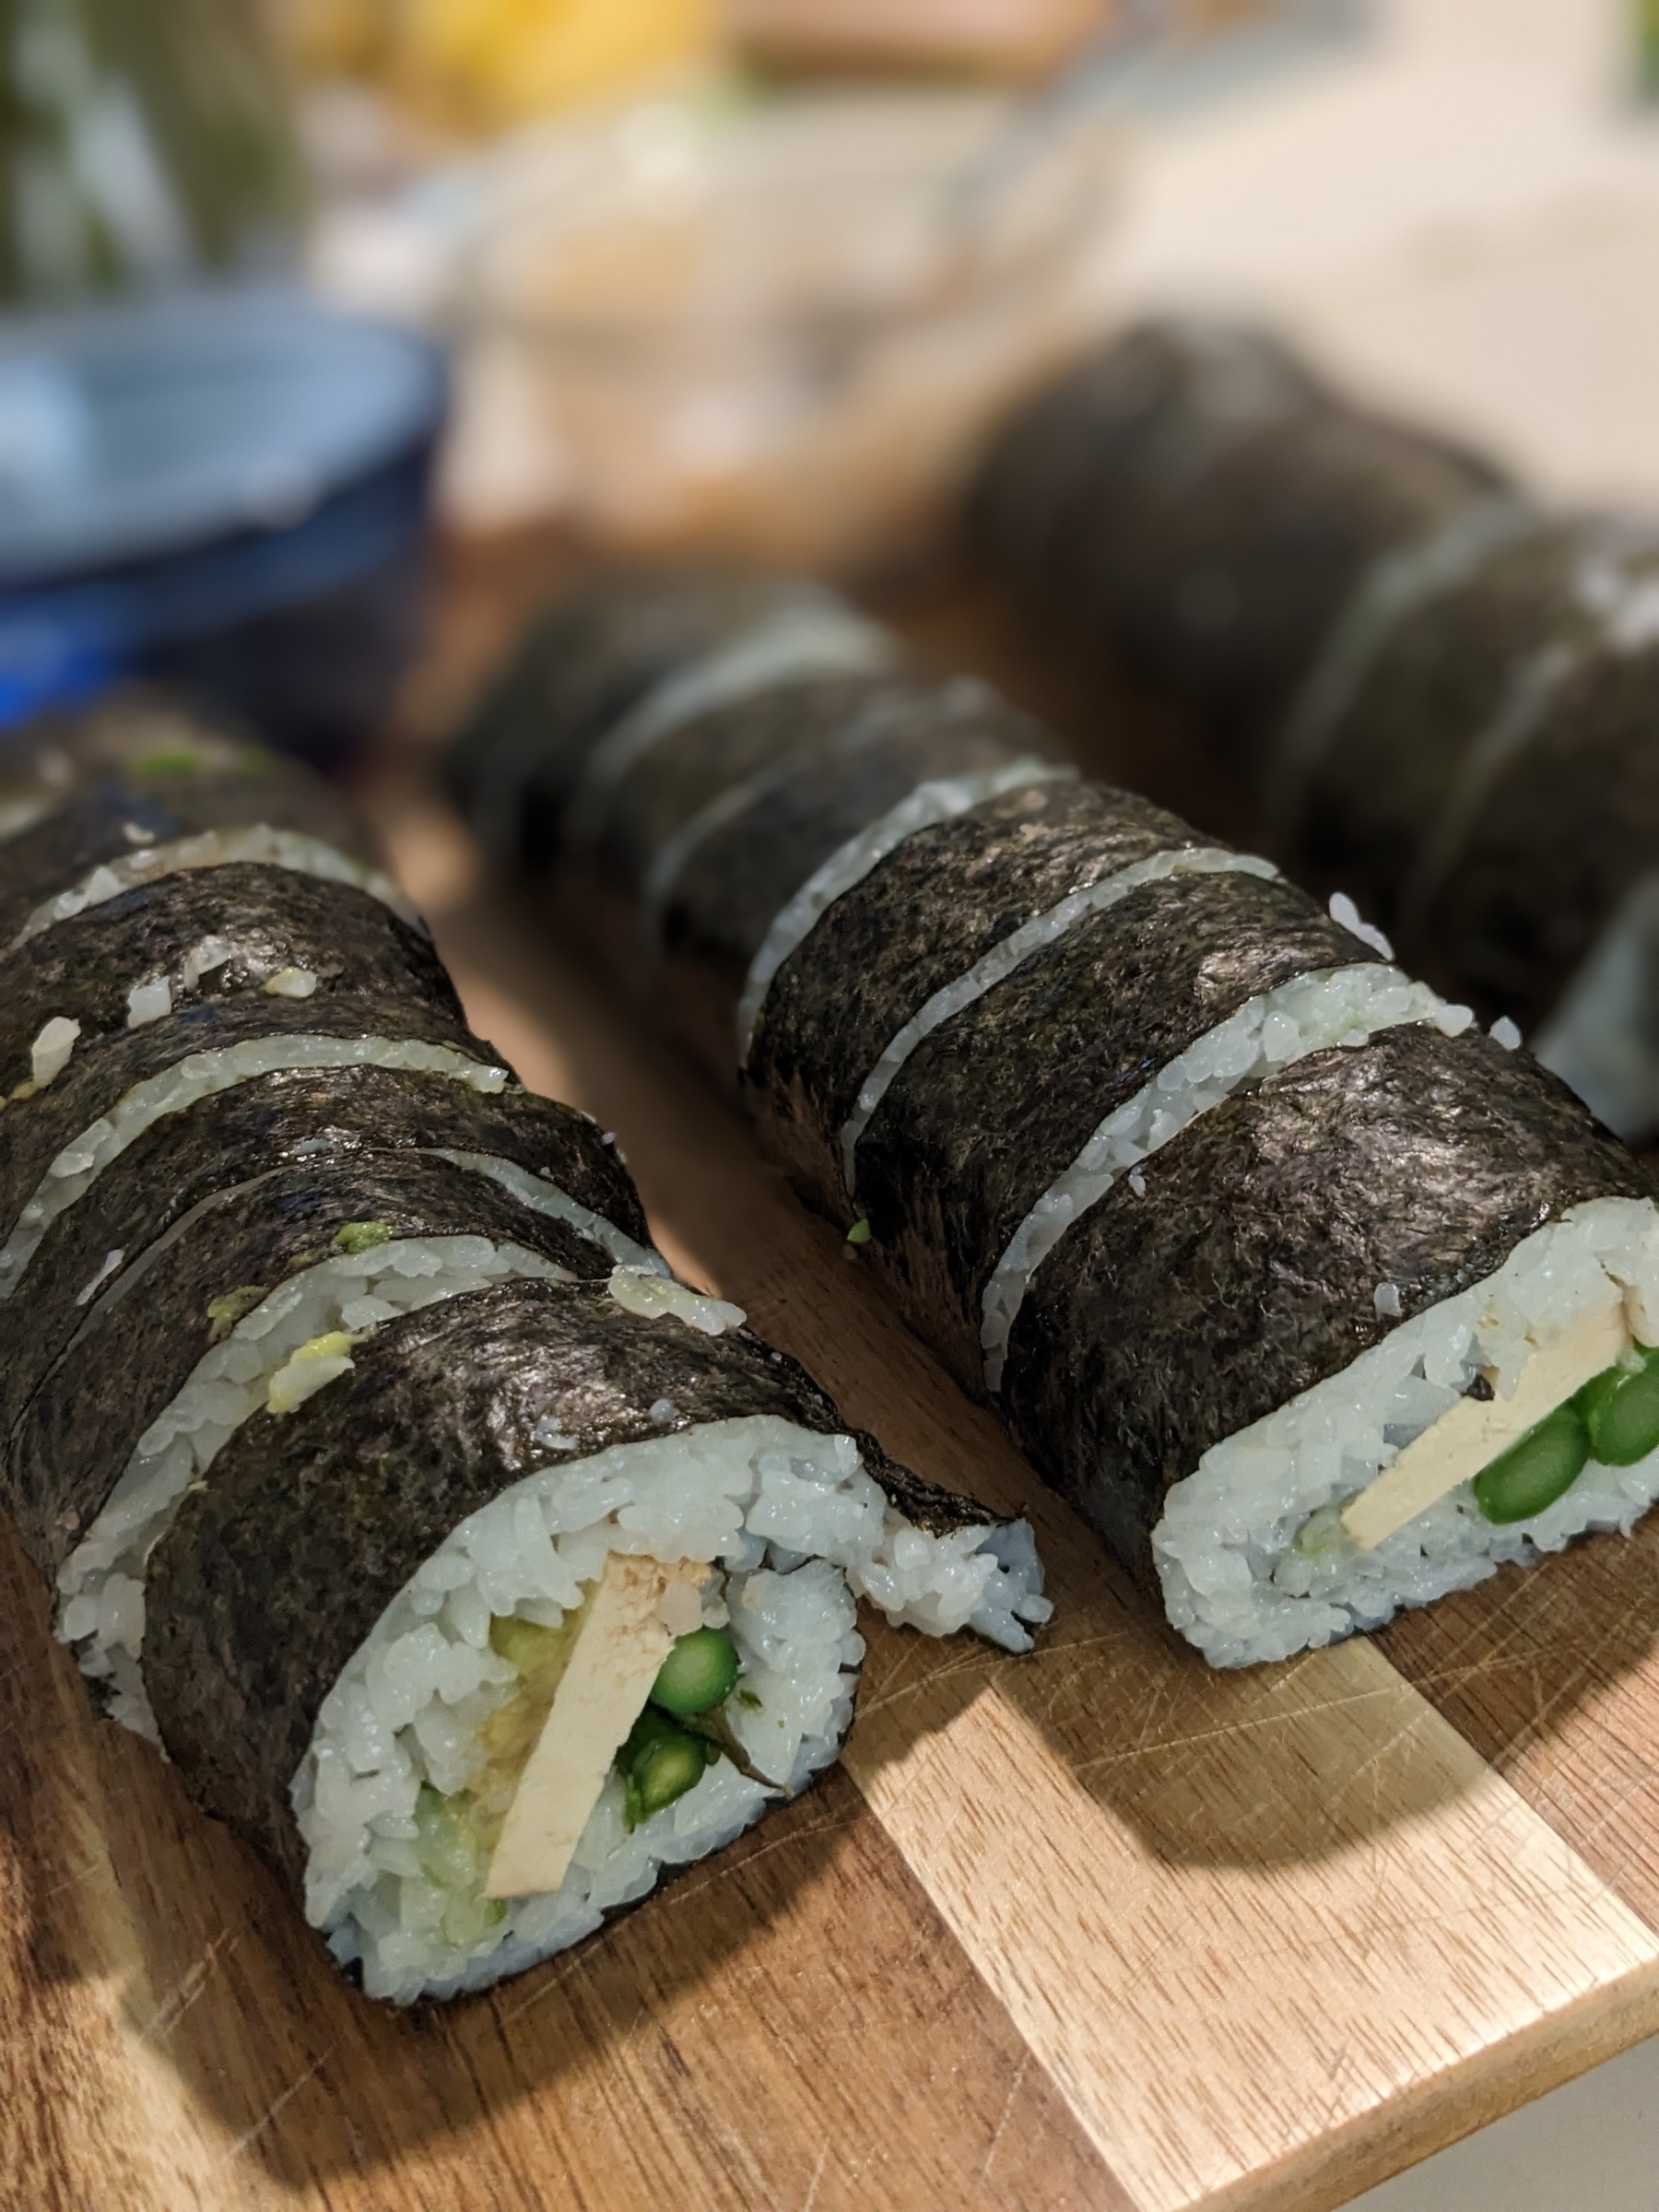 Three wide sushi rolls sit sliced on a wooden cutting board. The filling of asparagus, tofu, and avocado can be seen inside the rolls.